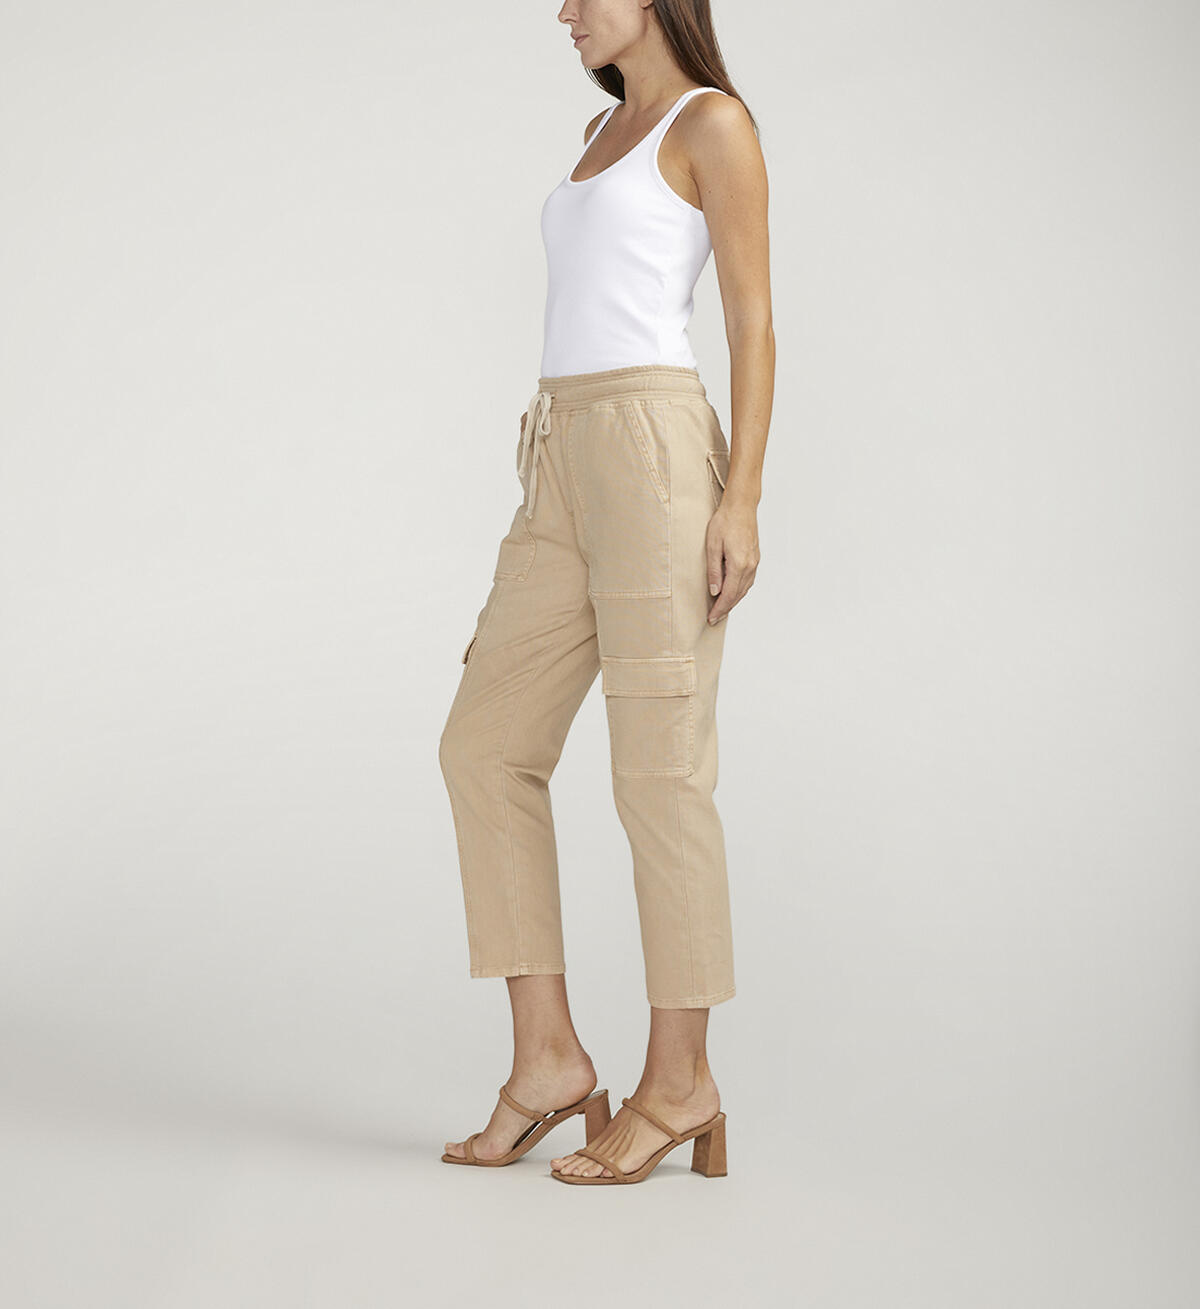 Textured Cargo Cropped Pants, , hi-res image number 2